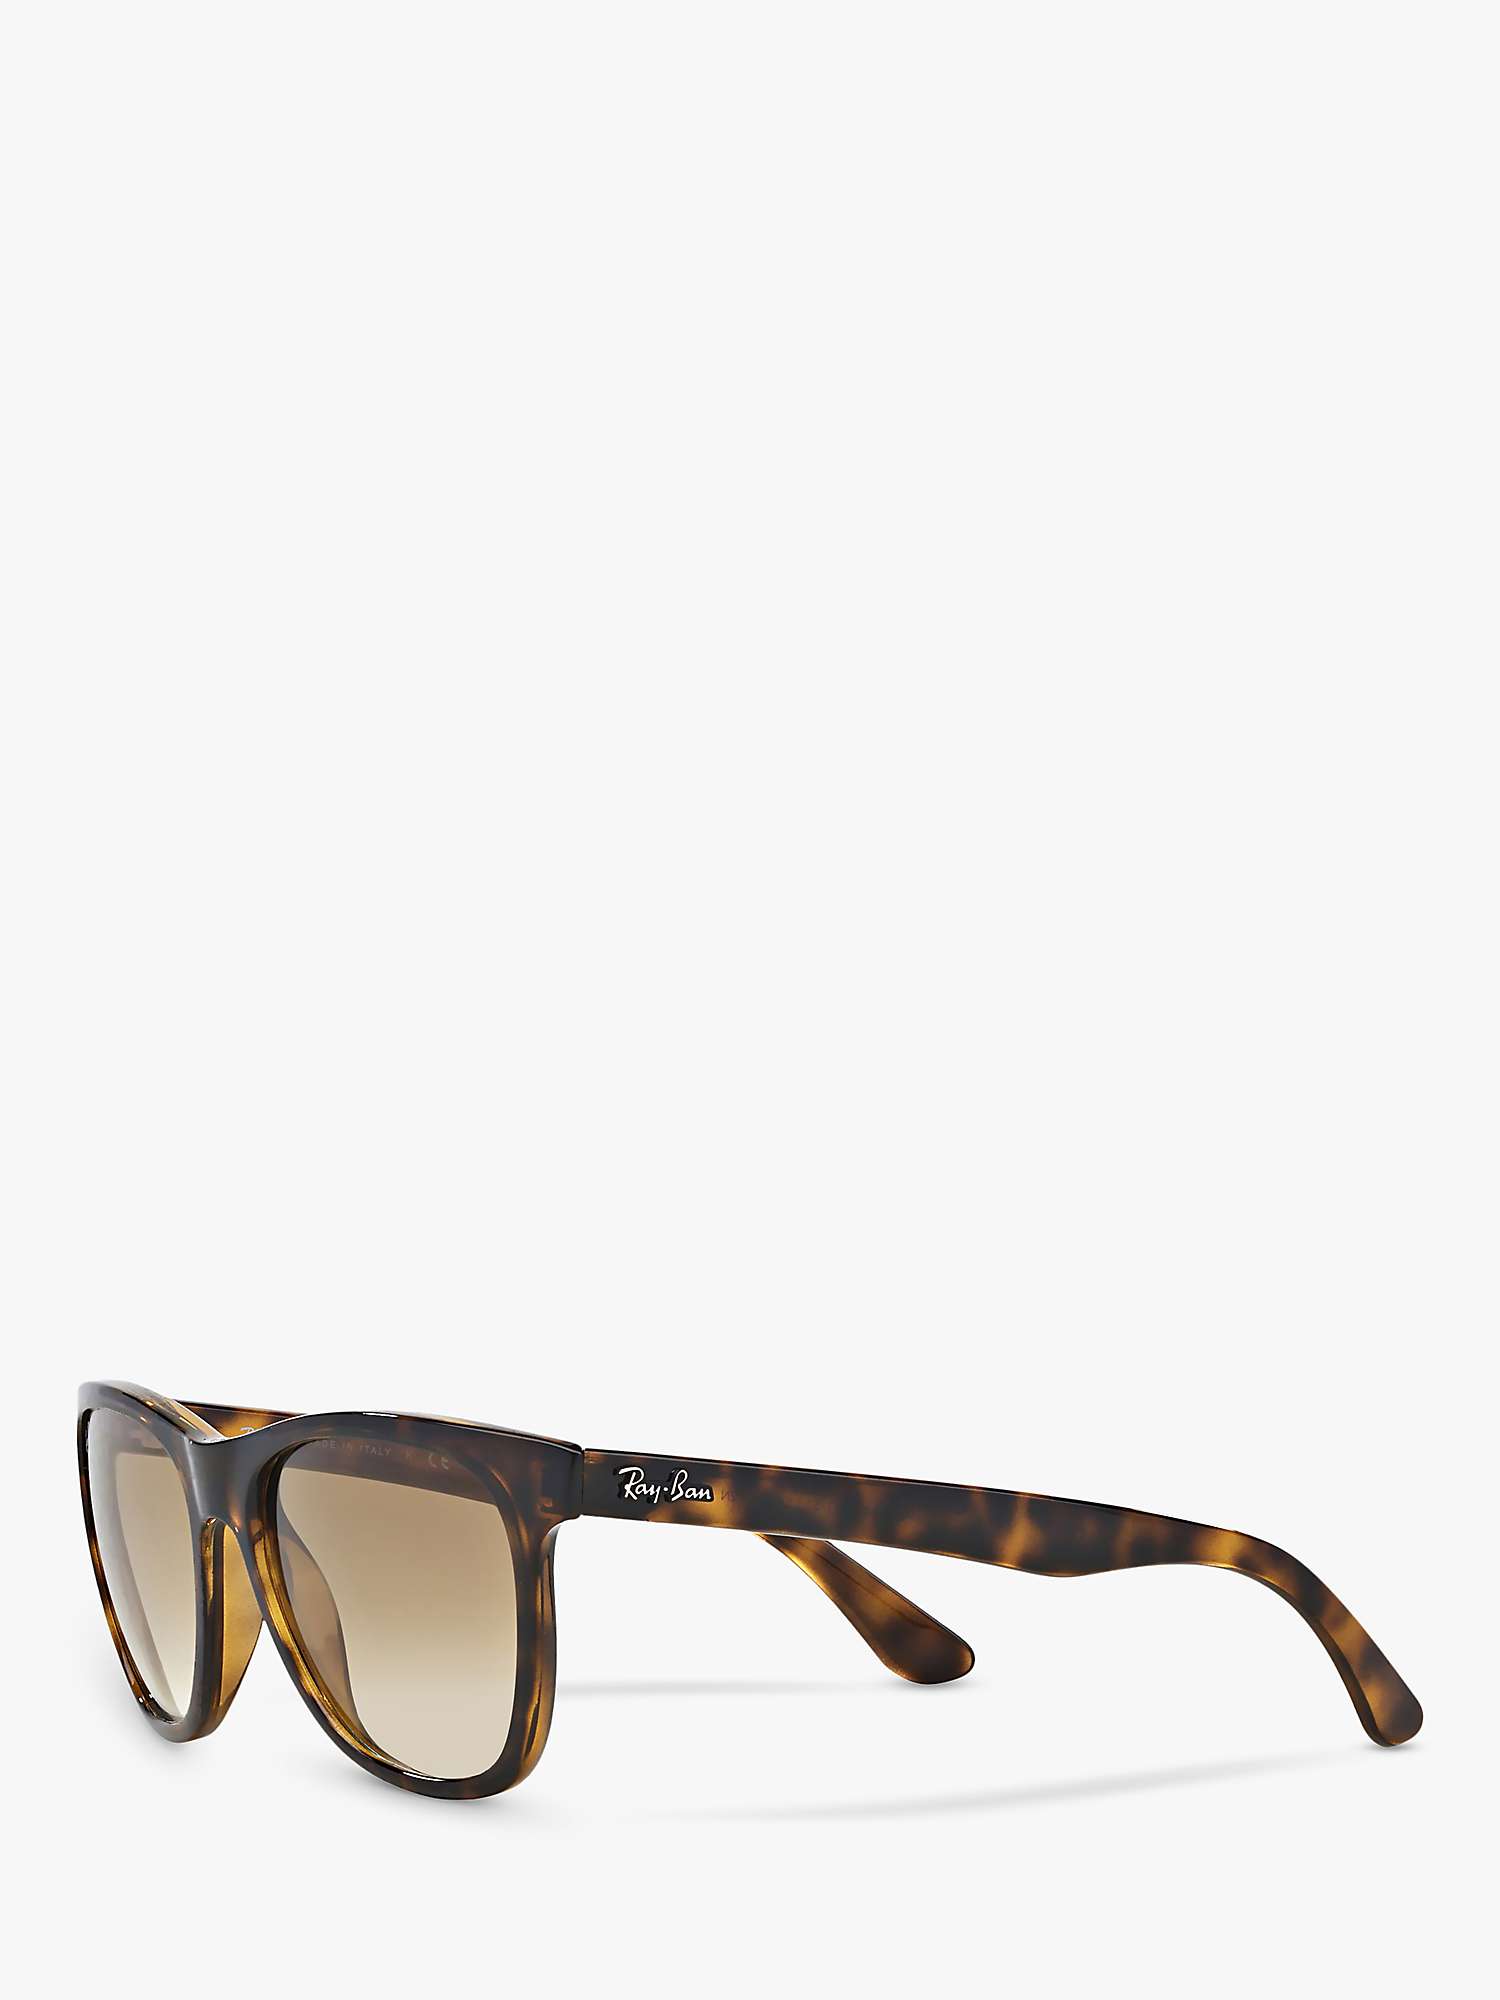 Buy Ray-Ban RB4184 710/51 Square Sunglasses, Tortoise Brown Online at johnlewis.com